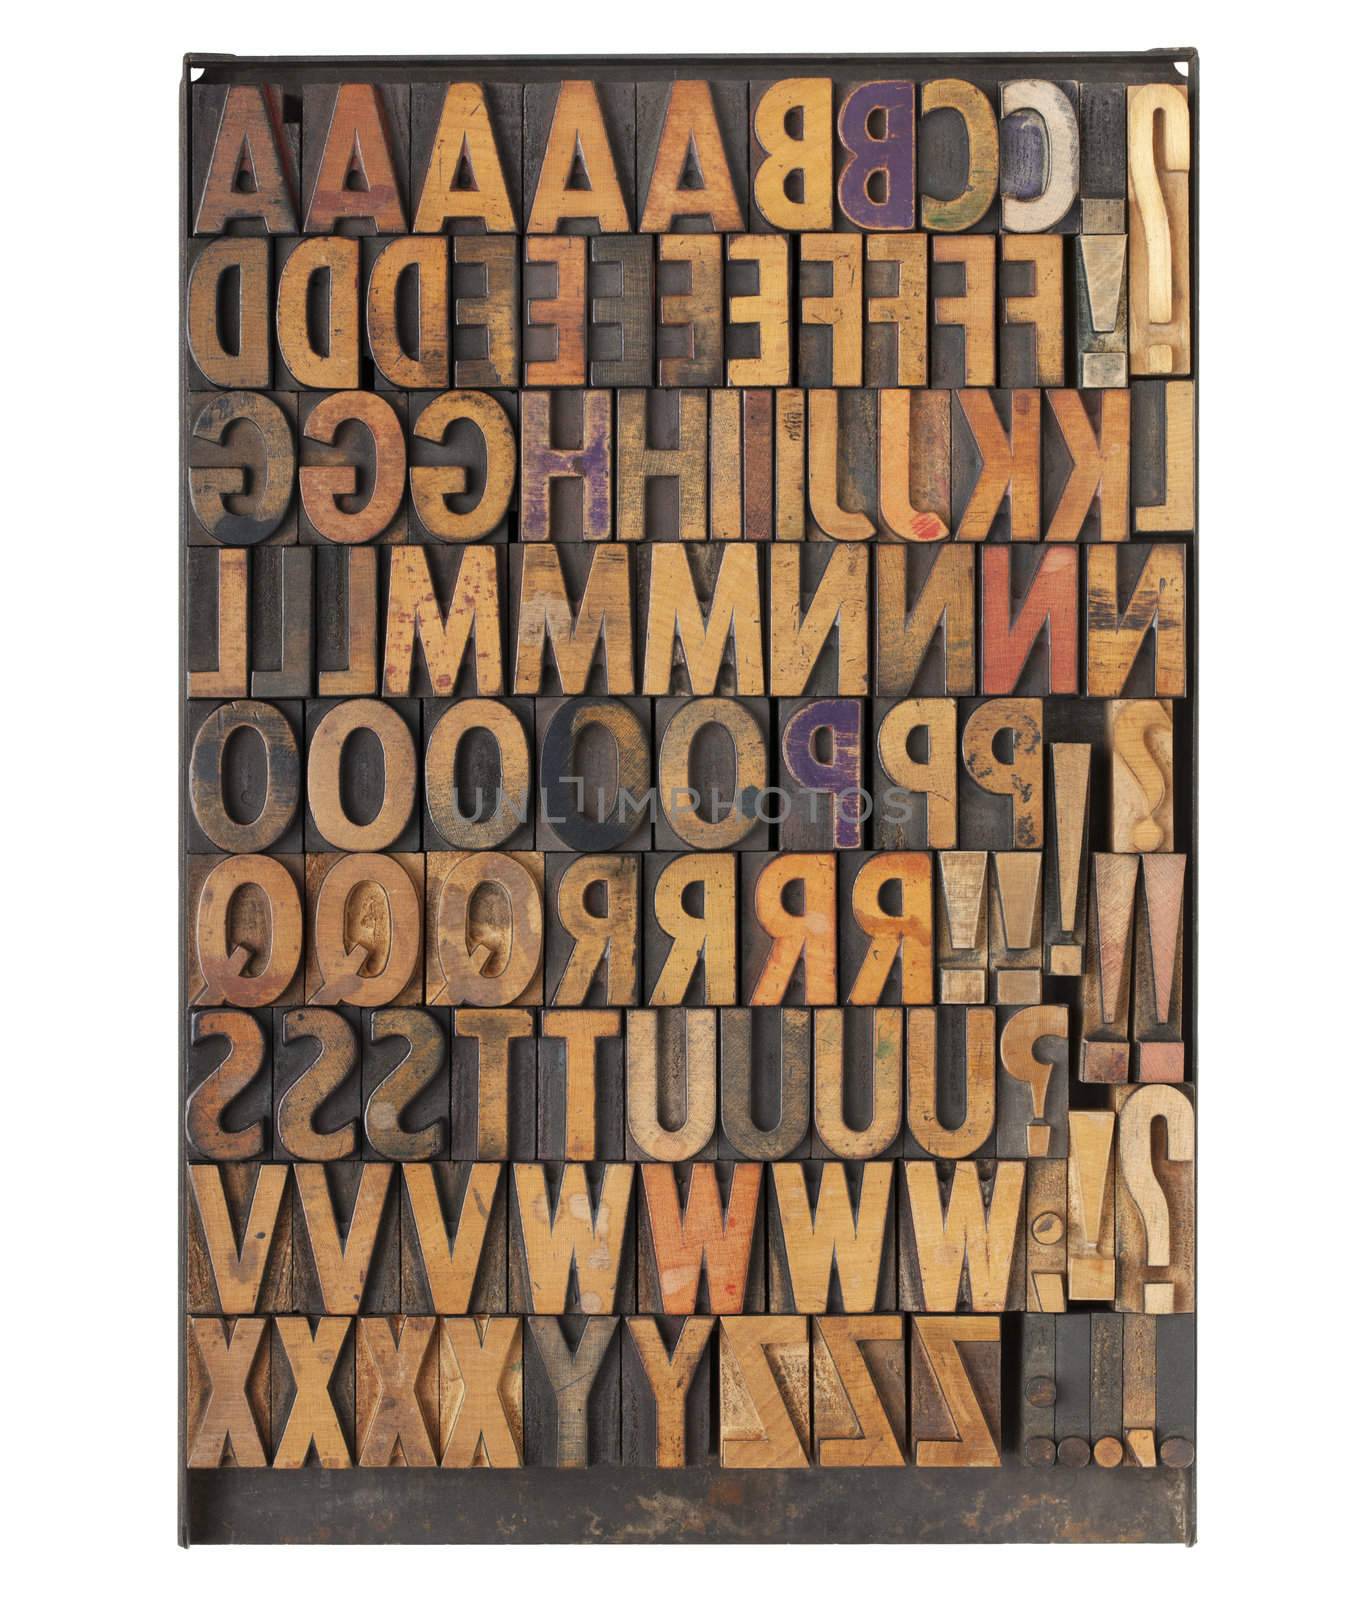 vintage wood letterpress printing blocks on a metal tray - the entire English alphabet with duplicate symbols and punctuation